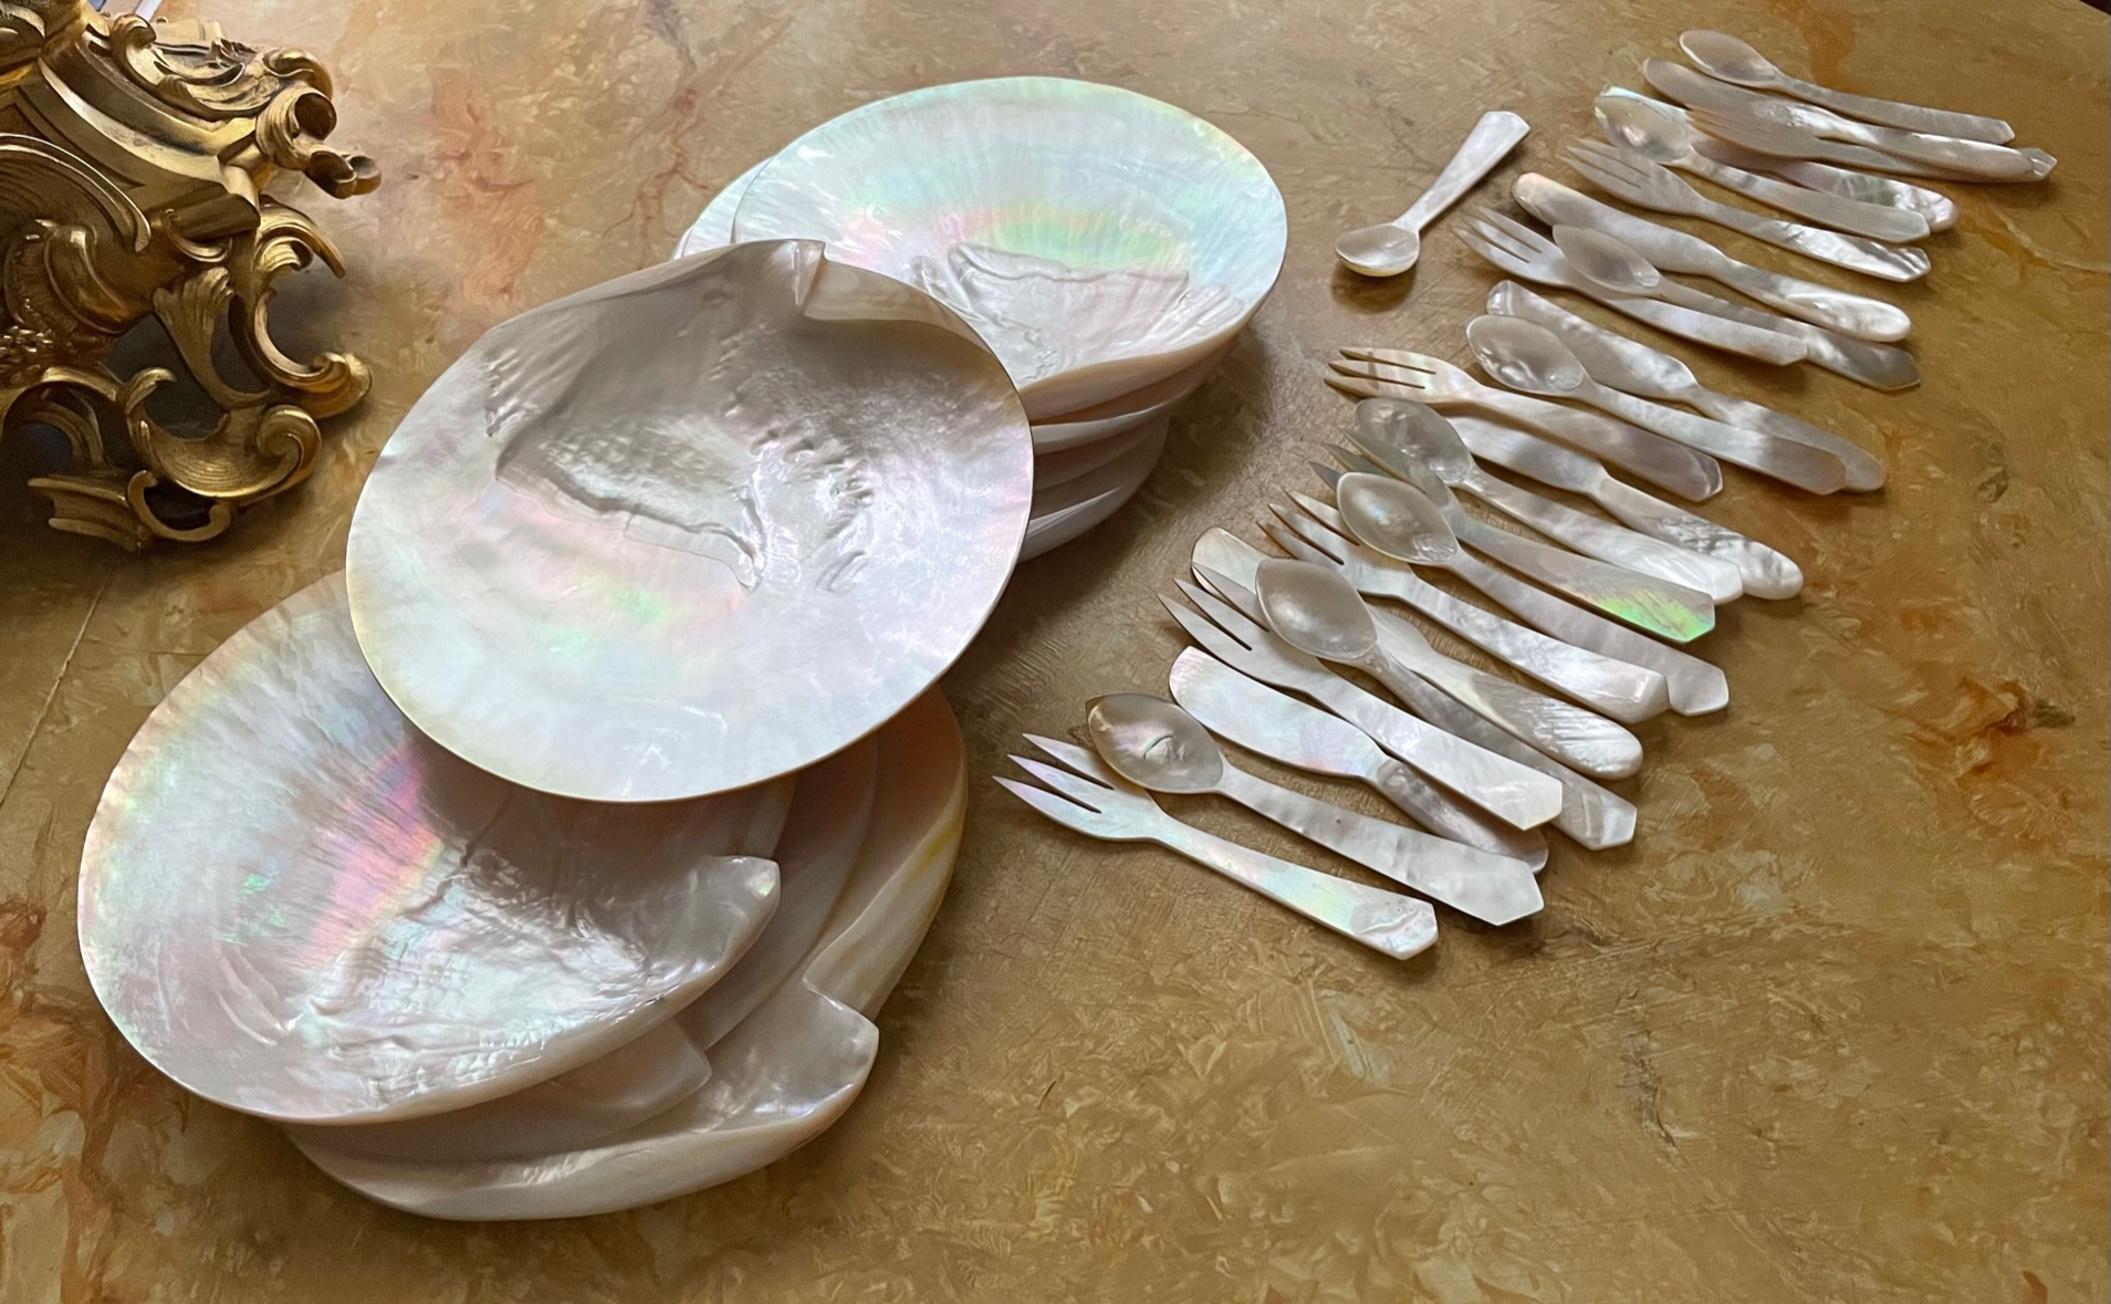 Mother of Pearl seashell Caviar dish with Cutlery. 8 complete sets. 

Rare set of eight caviar plates of polished mother of pearl. Each plate has a set with spoon, fork and knife. The plates, with iridescent luster and shine, are one of nature’s